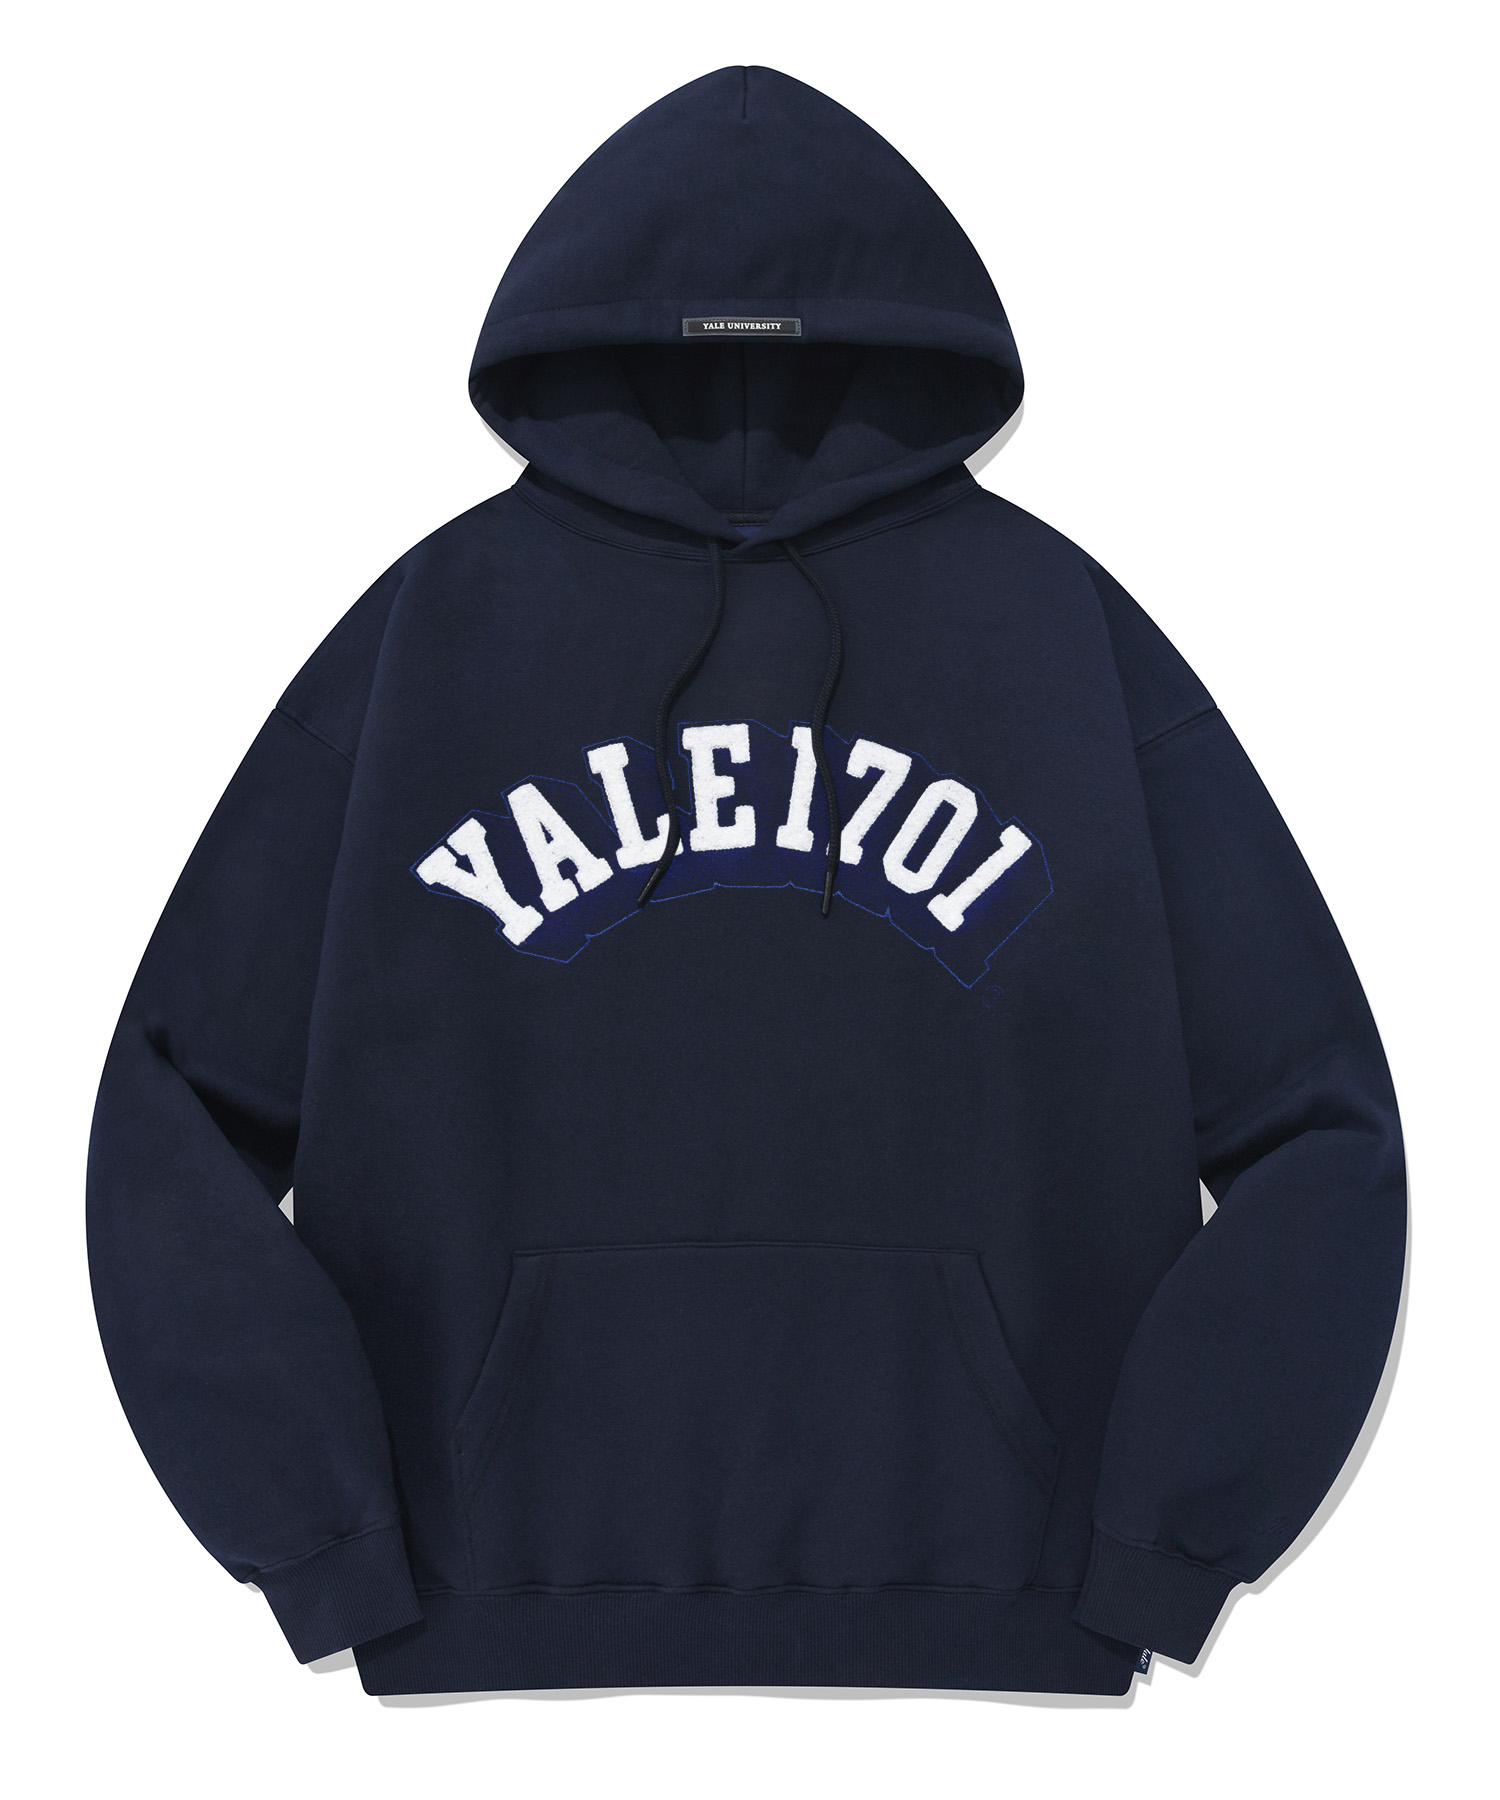 SINCE 1701 BOUCLE HOODIE NAVY